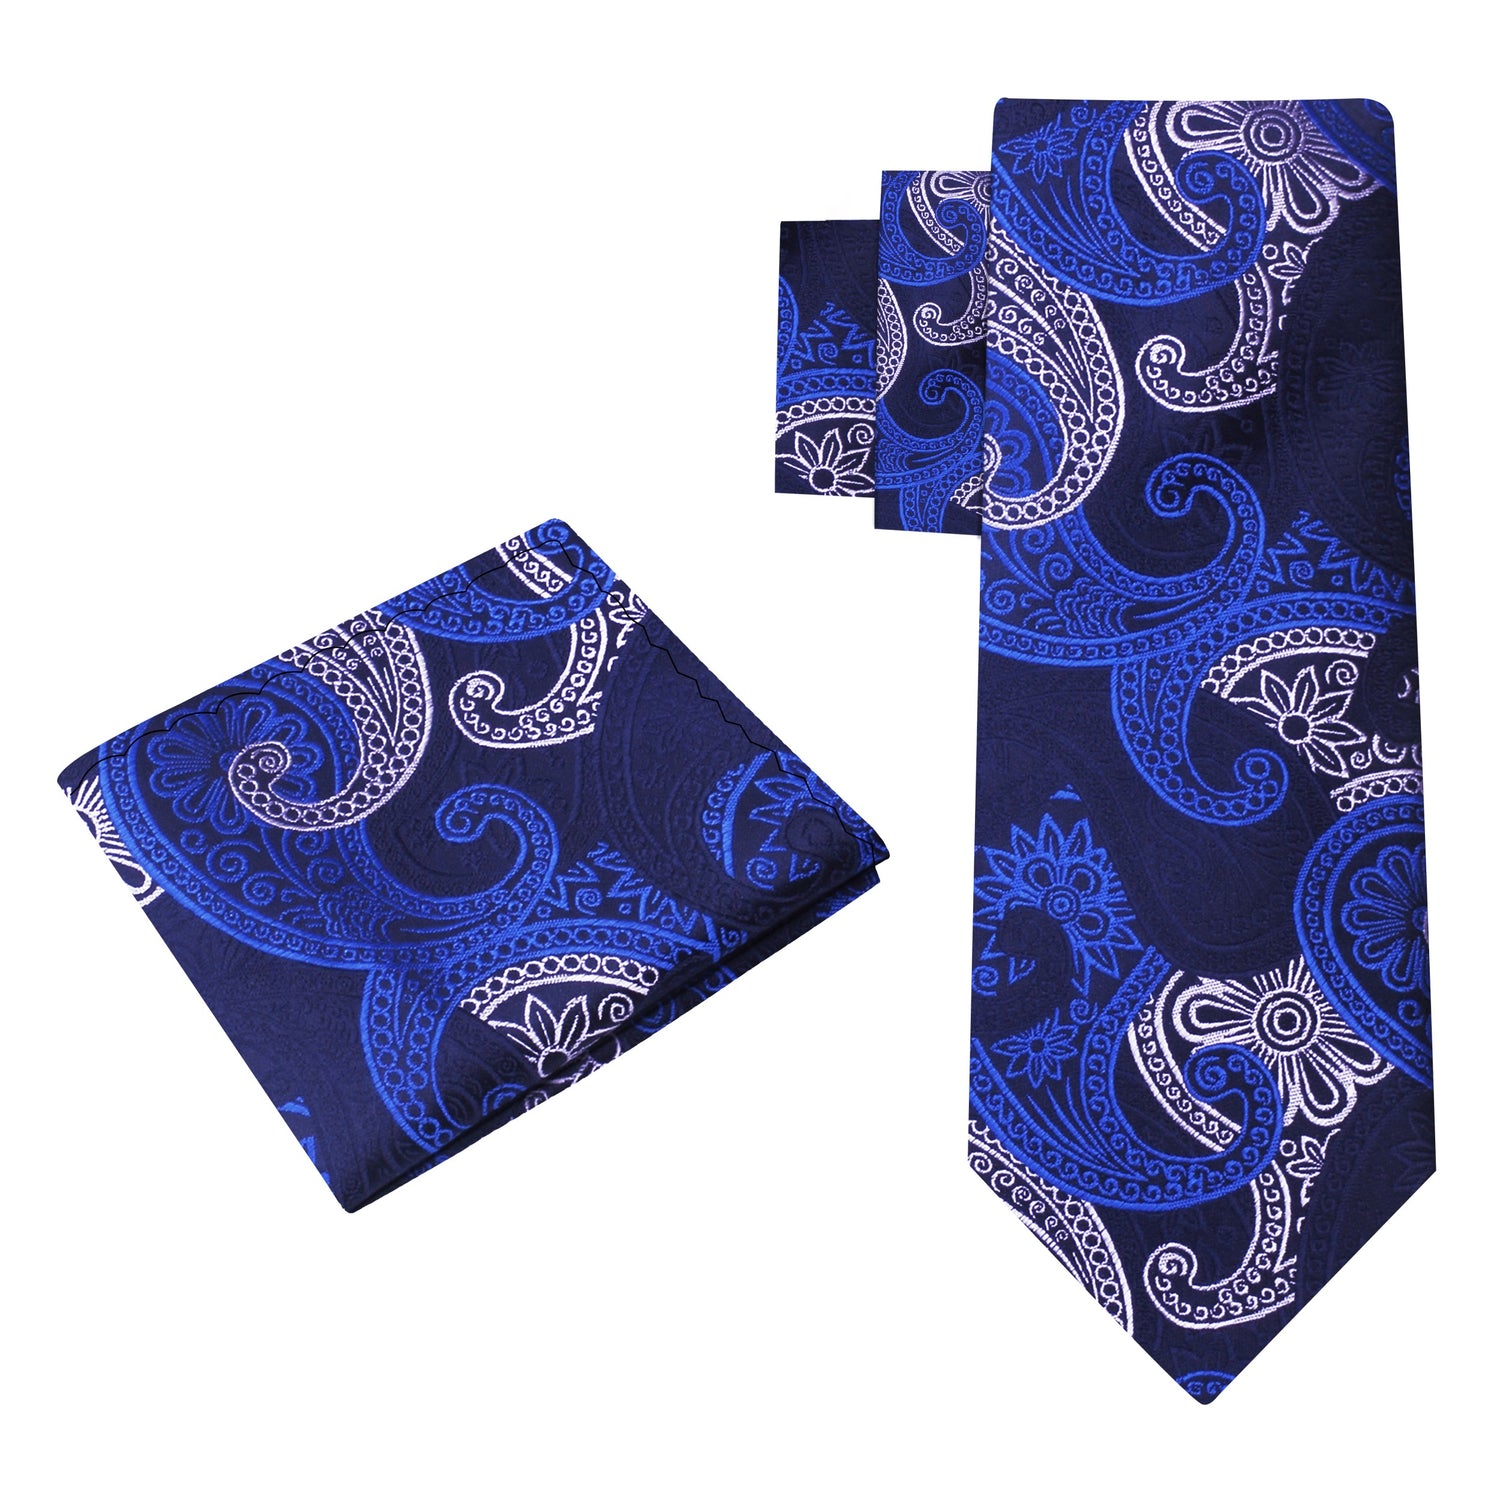 Alt View: A Dark Blue, White, Light Blue Paisley Pattern Necktie With Matching Pocket Square